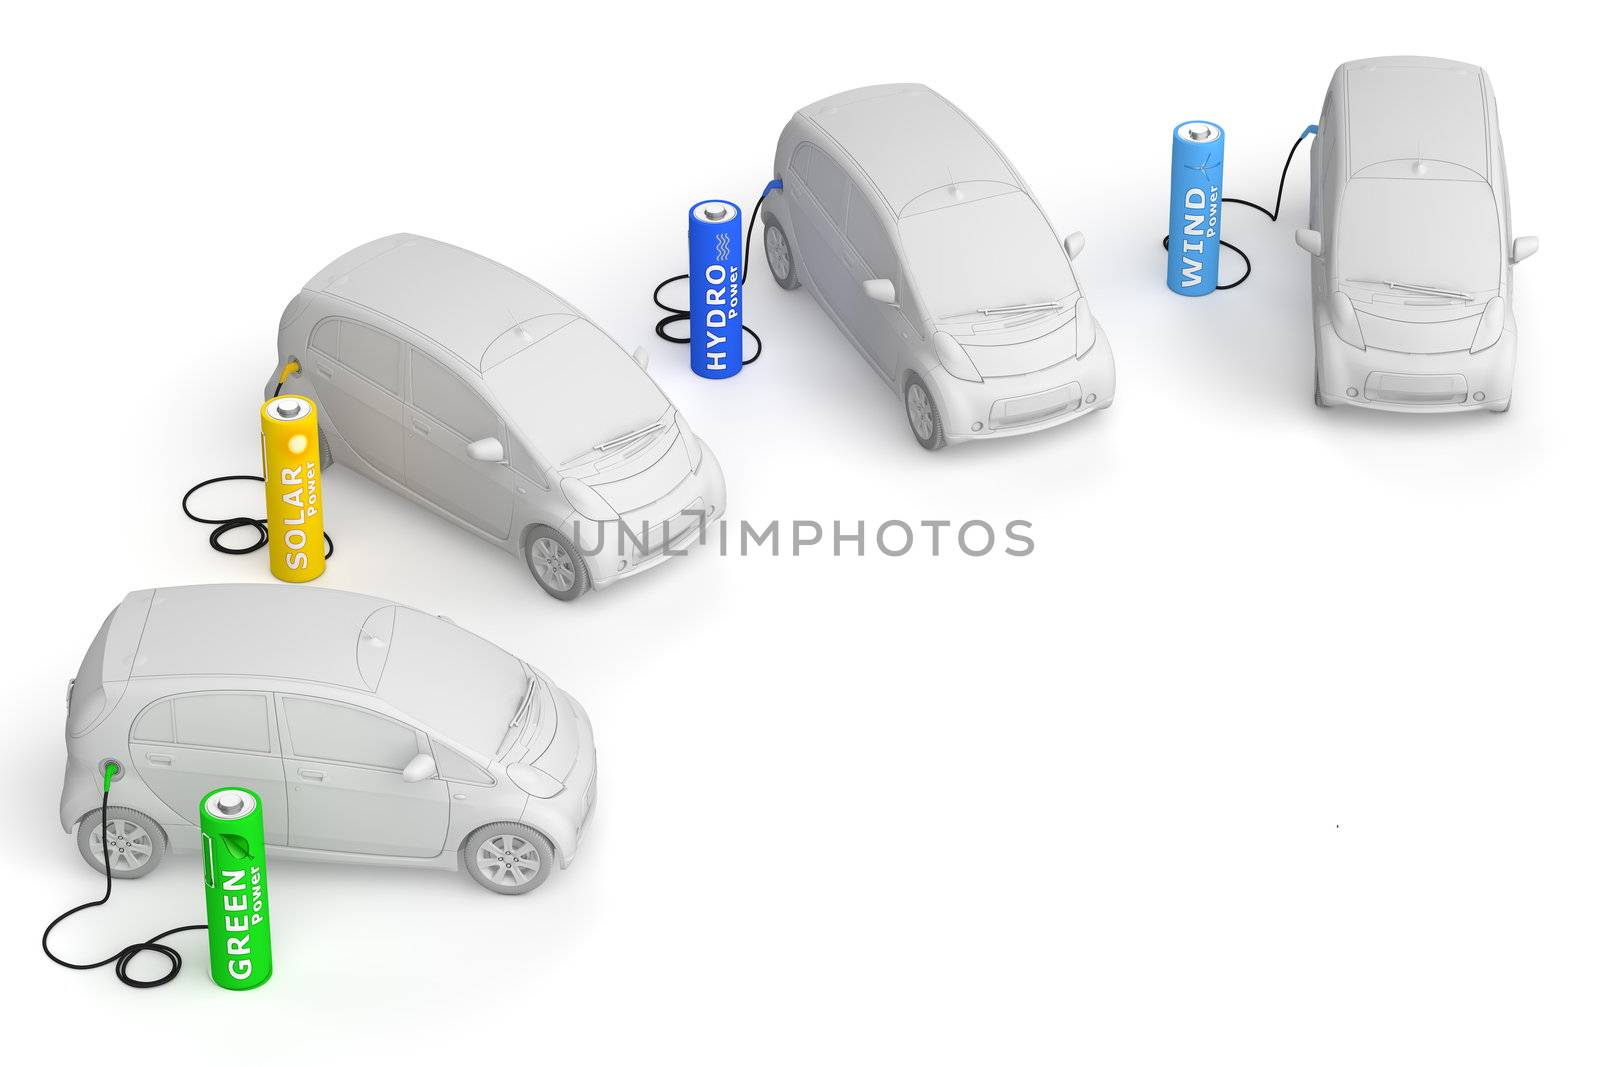 four E-Cars in a circle are fuelled by renewable energy - solar, hydro, wind and green energy